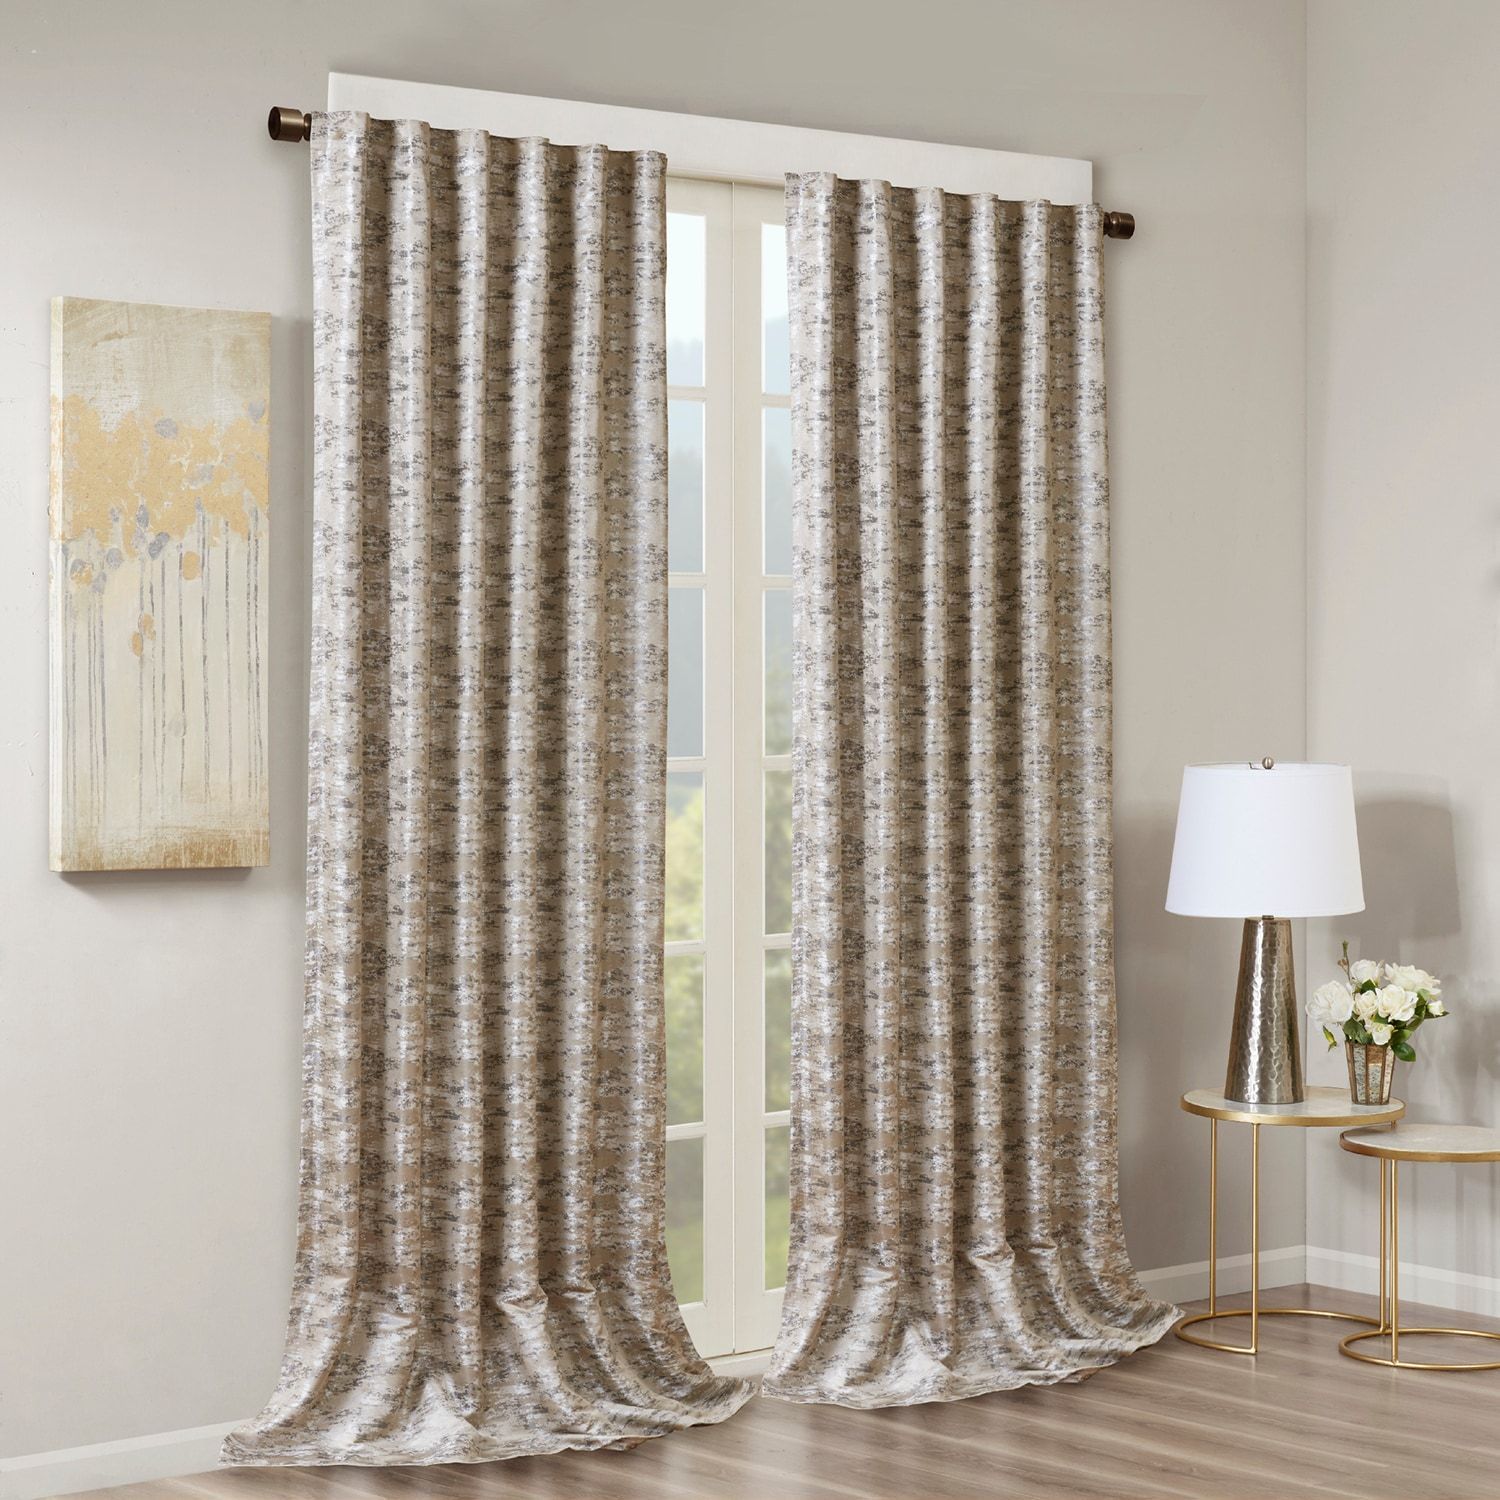 Sunsmart Blackout 1 Panel Odessa Total Window Curtain In For Davis Patio Grommet Top Single Curtain Panels (View 11 of 20)